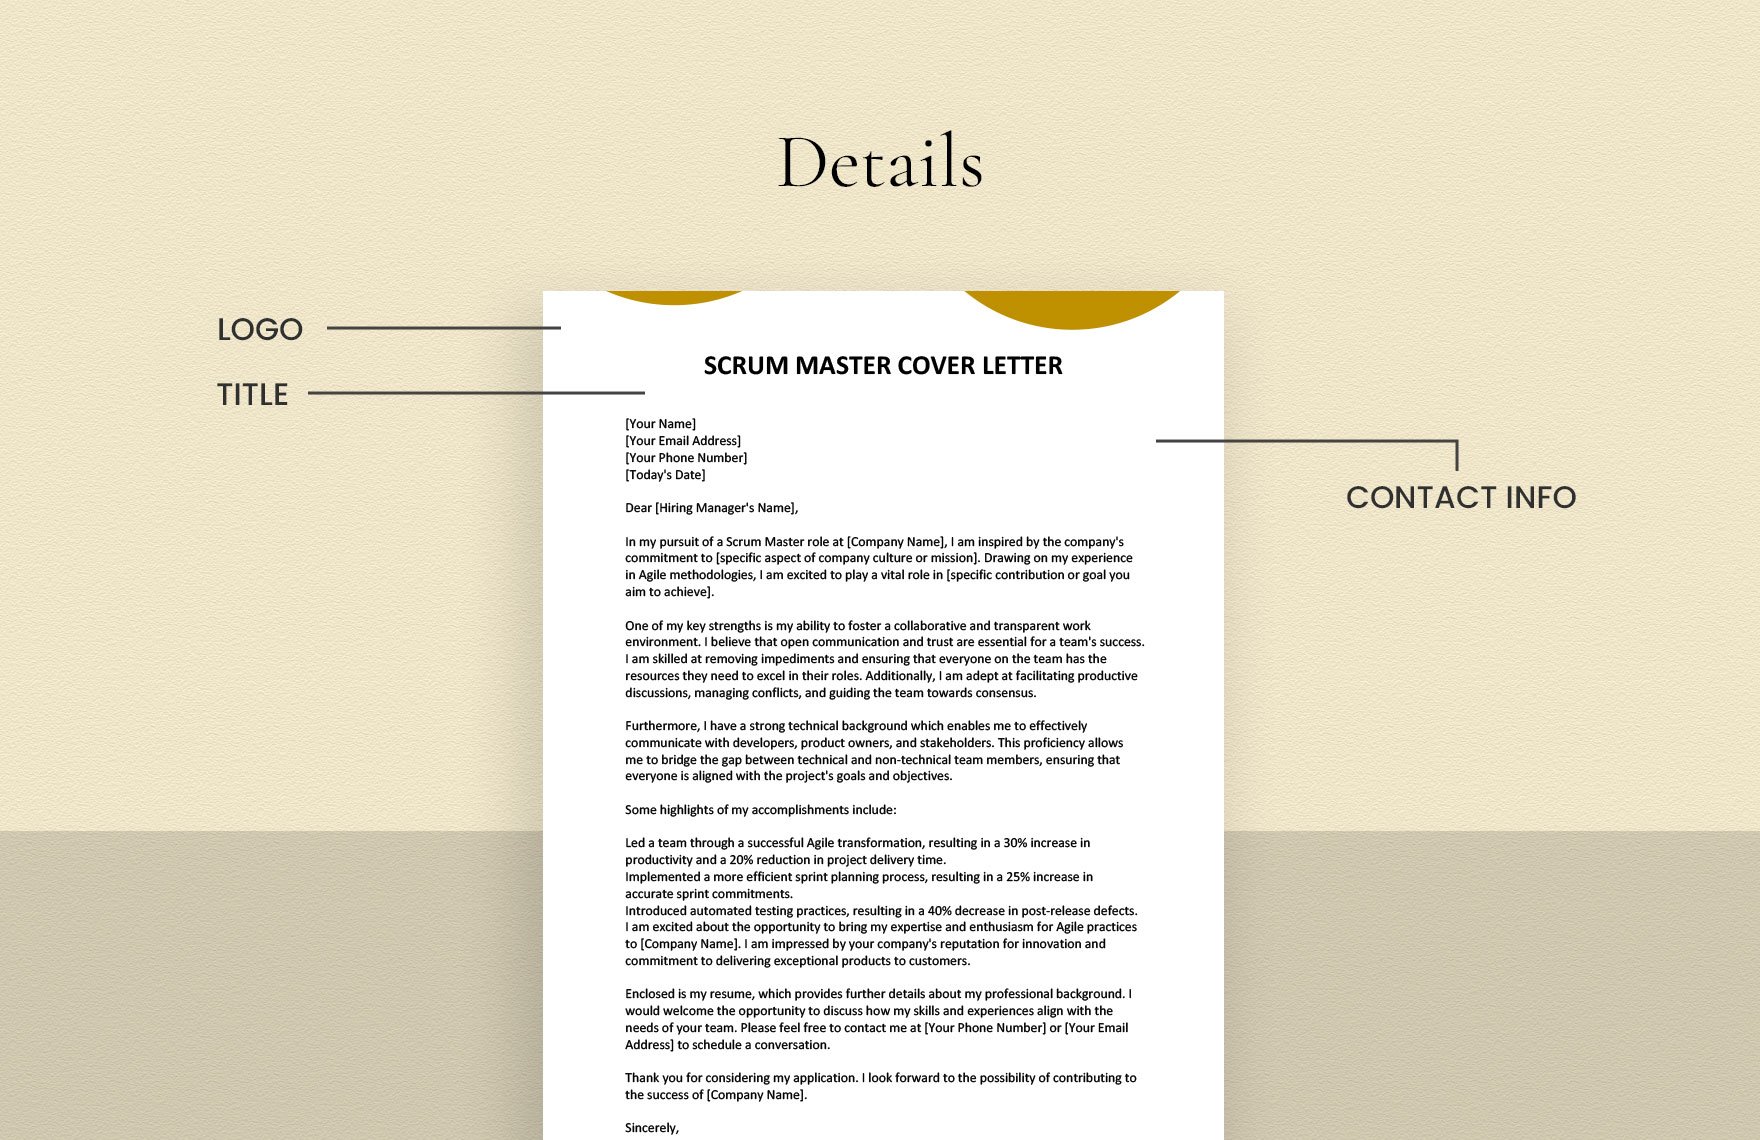 Scrum Master Cover Letter